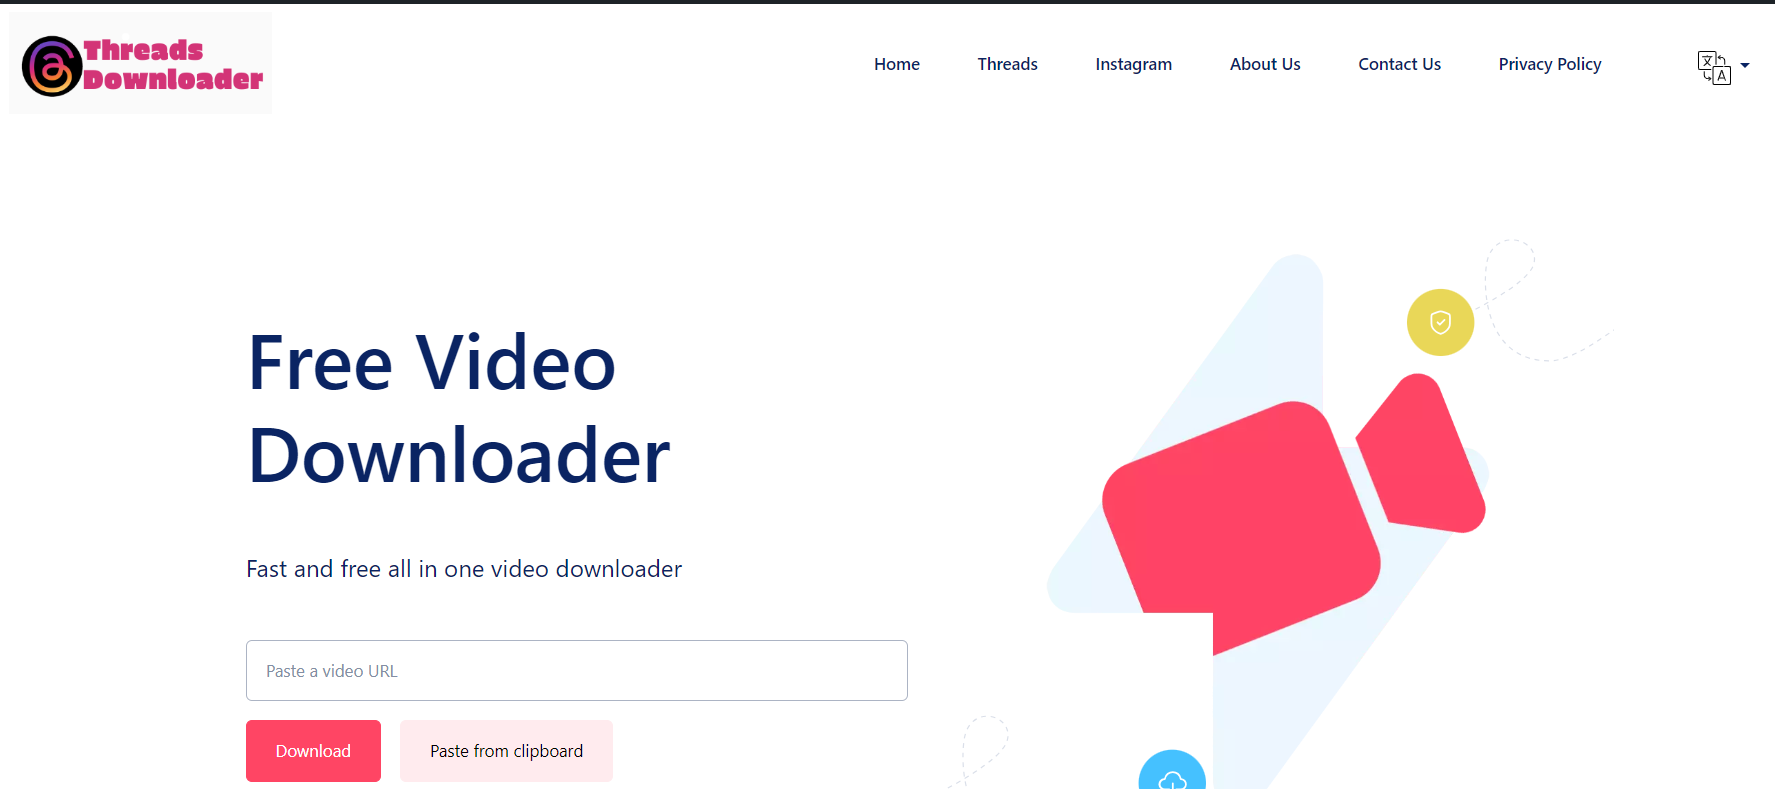 How to Download Threads Video and Pictures: A Step-by-Step Guide